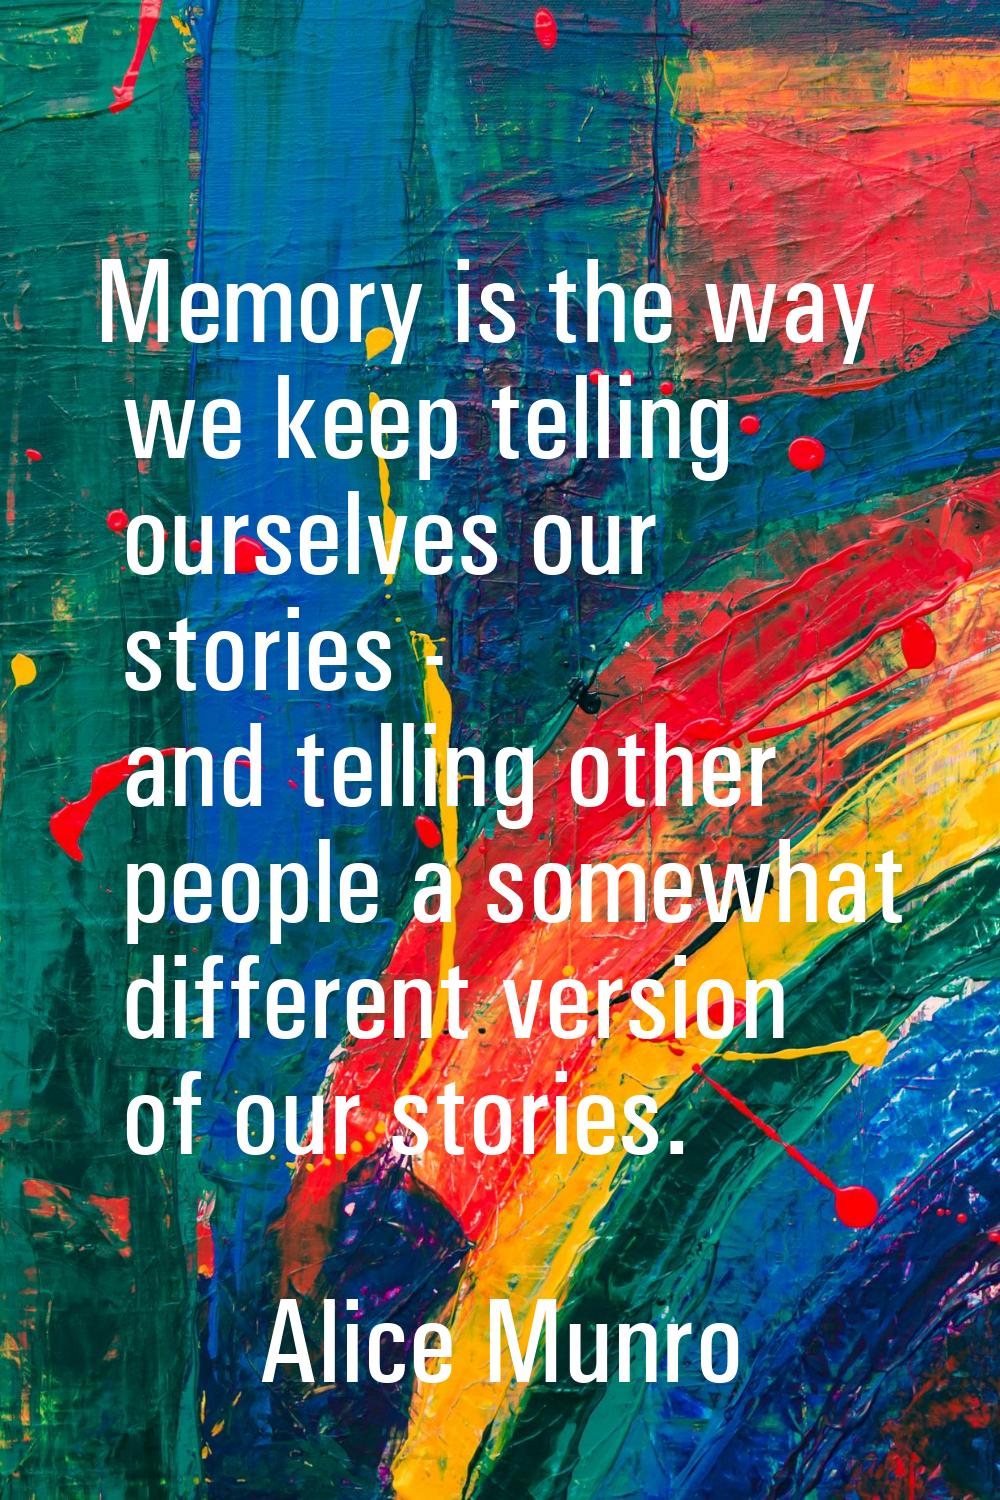 Memory is the way we keep telling ourselves our stories - and telling other people a somewhat diffe